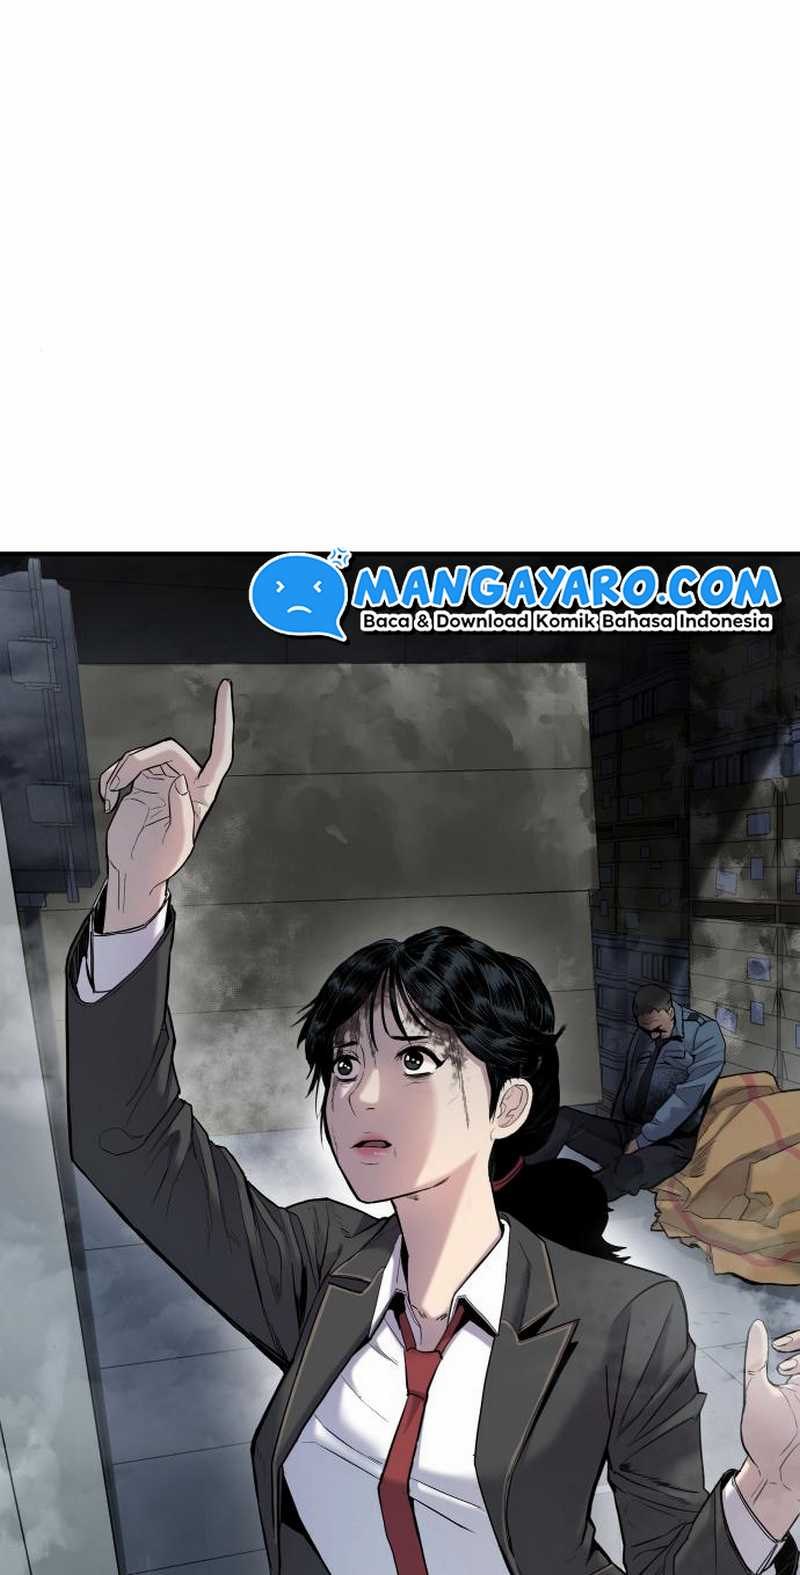 Manager Kim Chapter 08.2